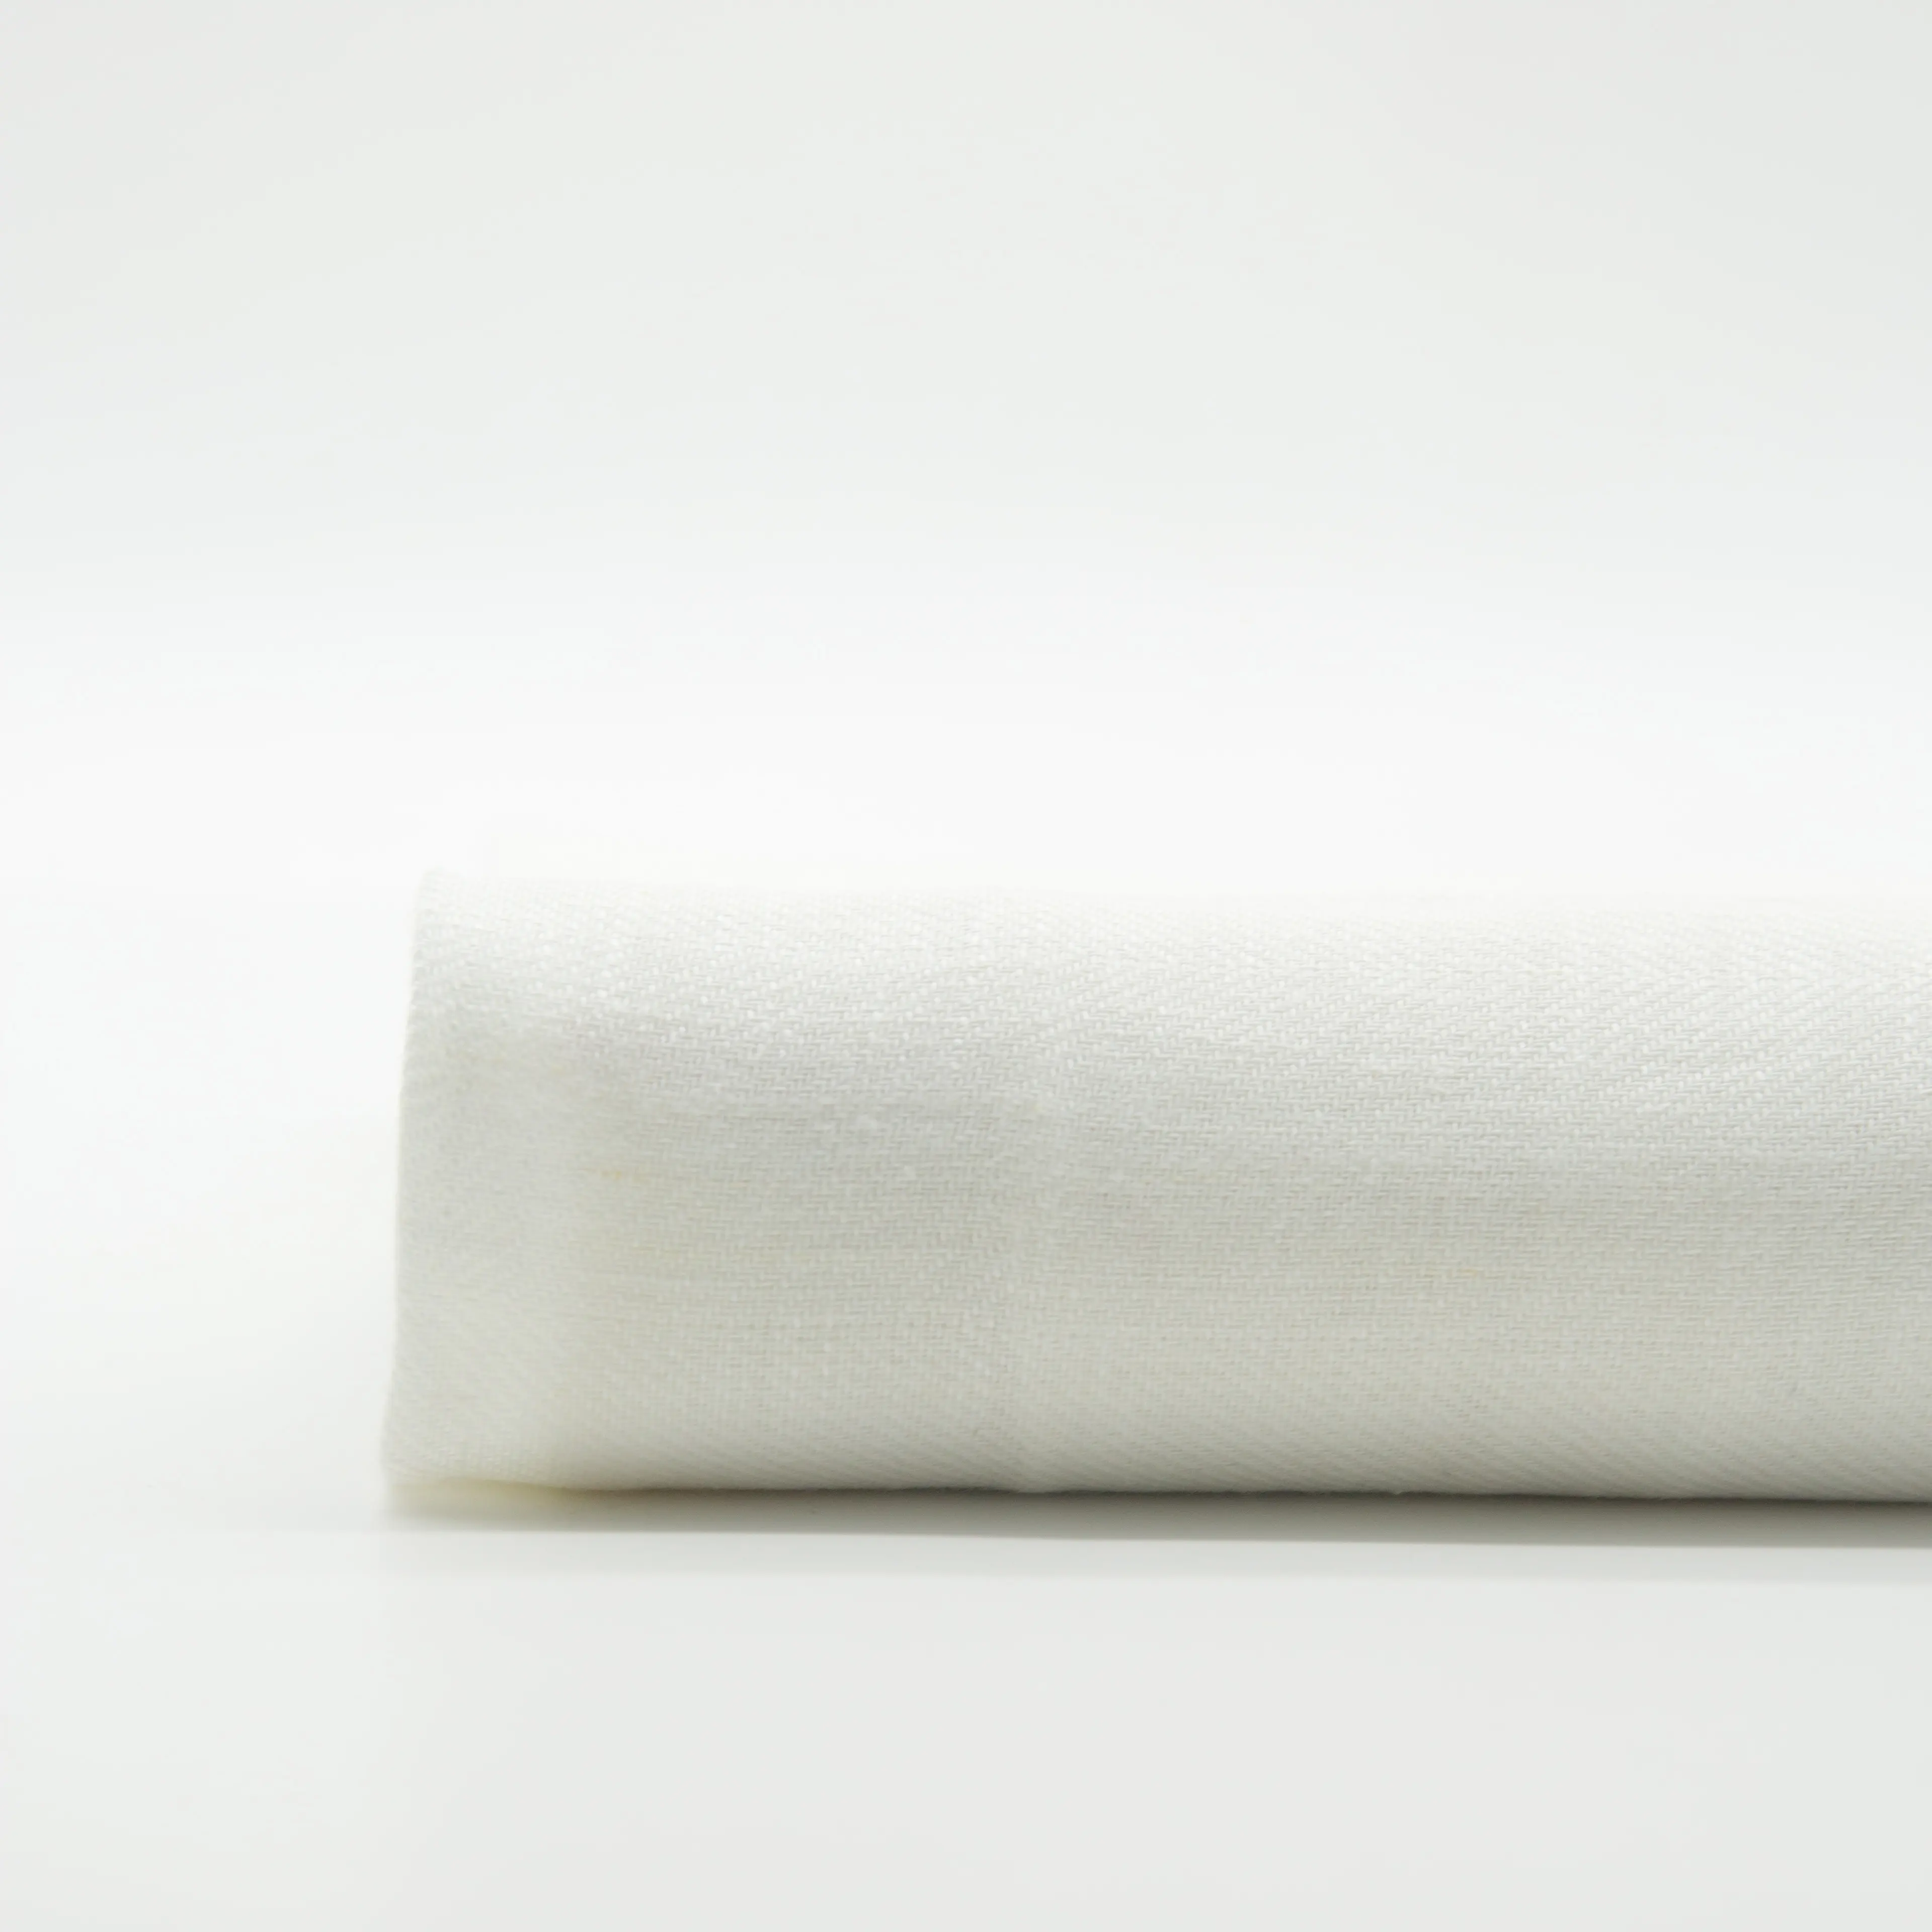 Super hot selling rayon linen white solid fabric for shirts